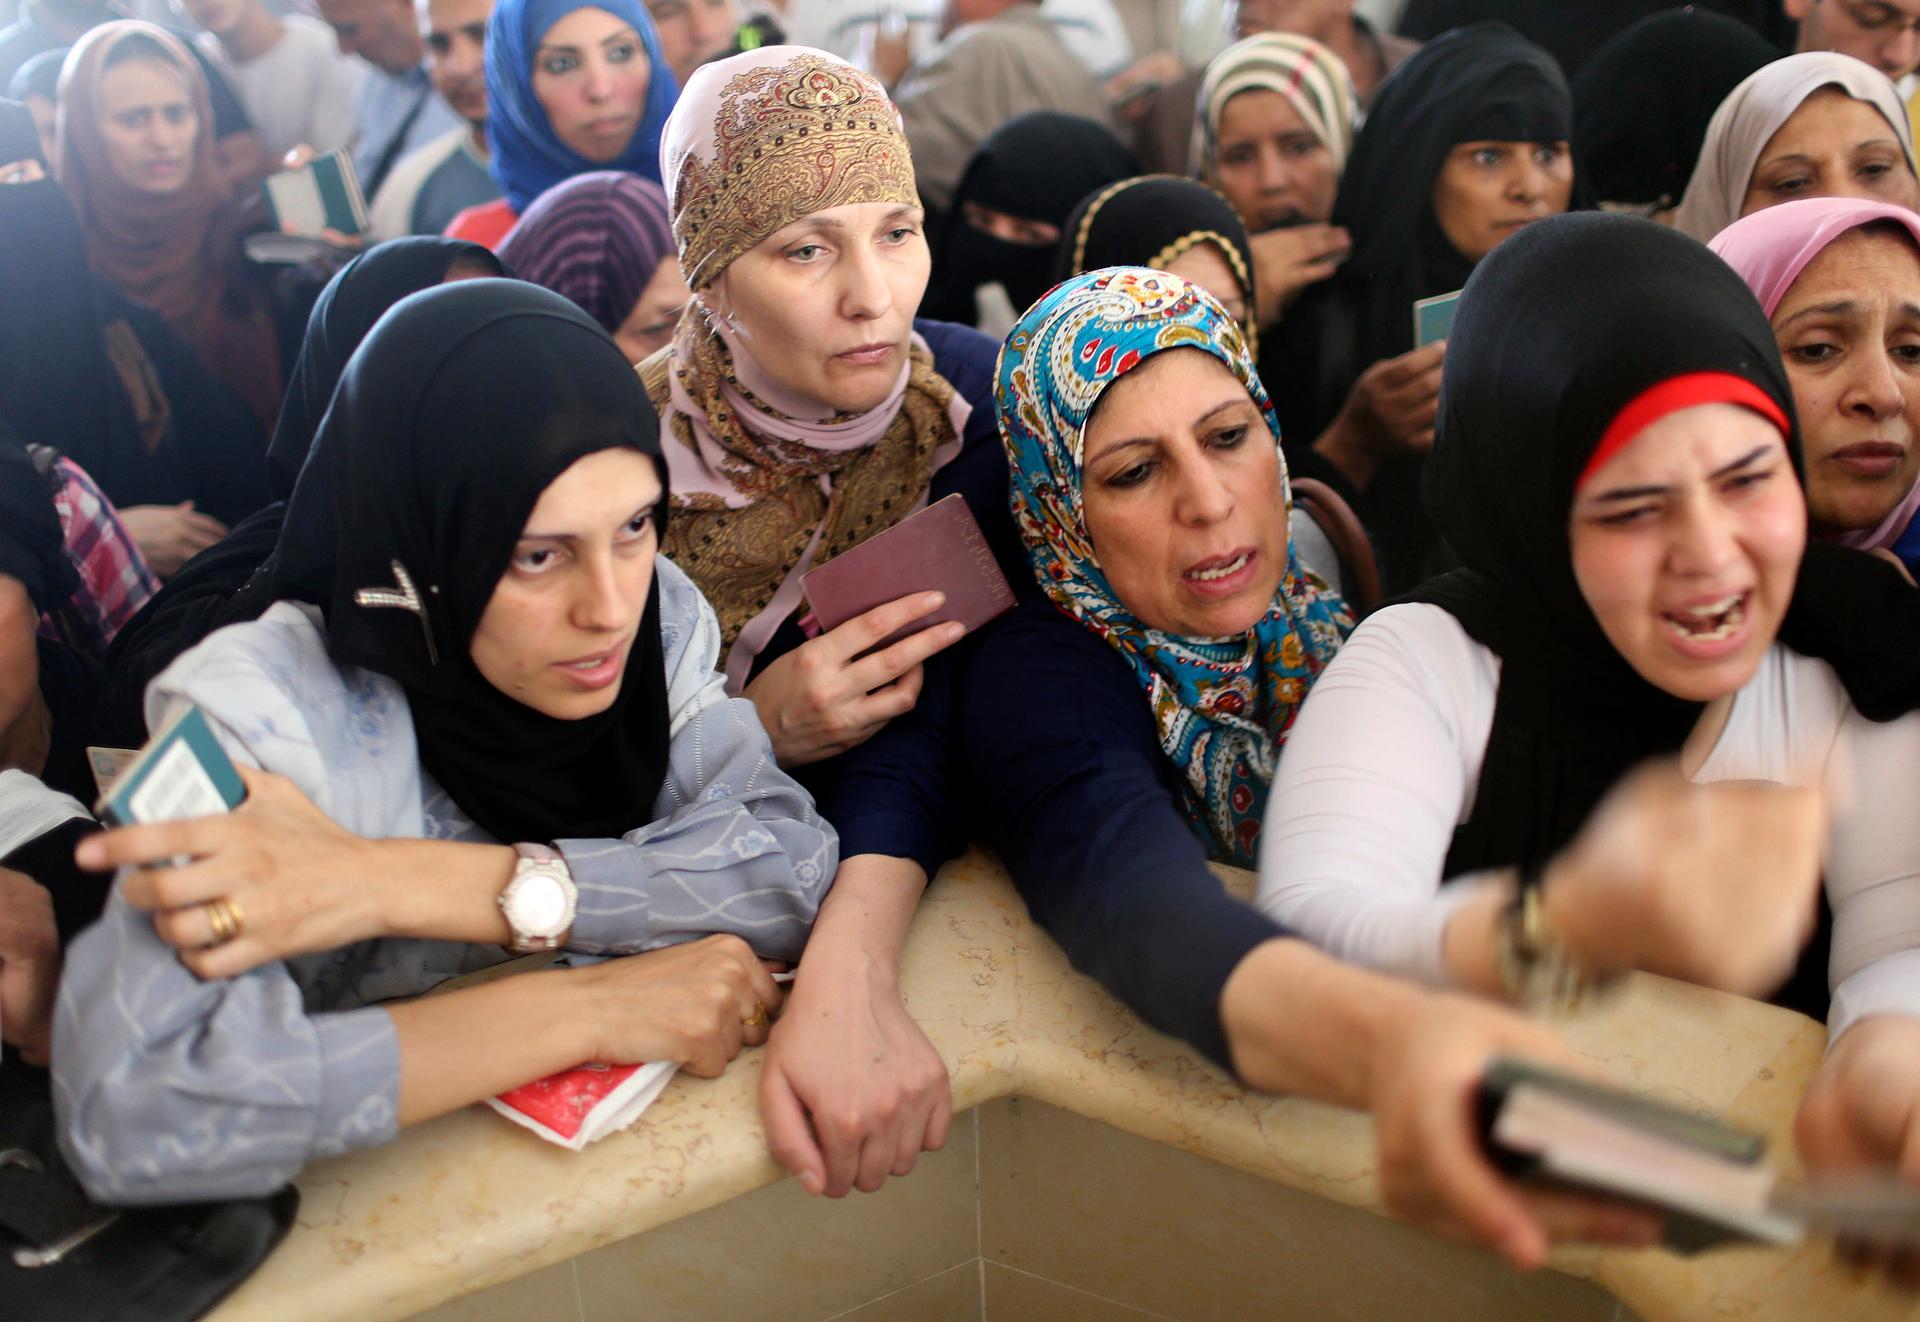 Women hoping to cross into Egypt present their passports as they wait at the Rafah crossing between Egypt and the southern Gaza Strip on July 12, 2014. Egypt's state news agency said Egyptian authorities had decided to open the Rafah border crossing to Ga